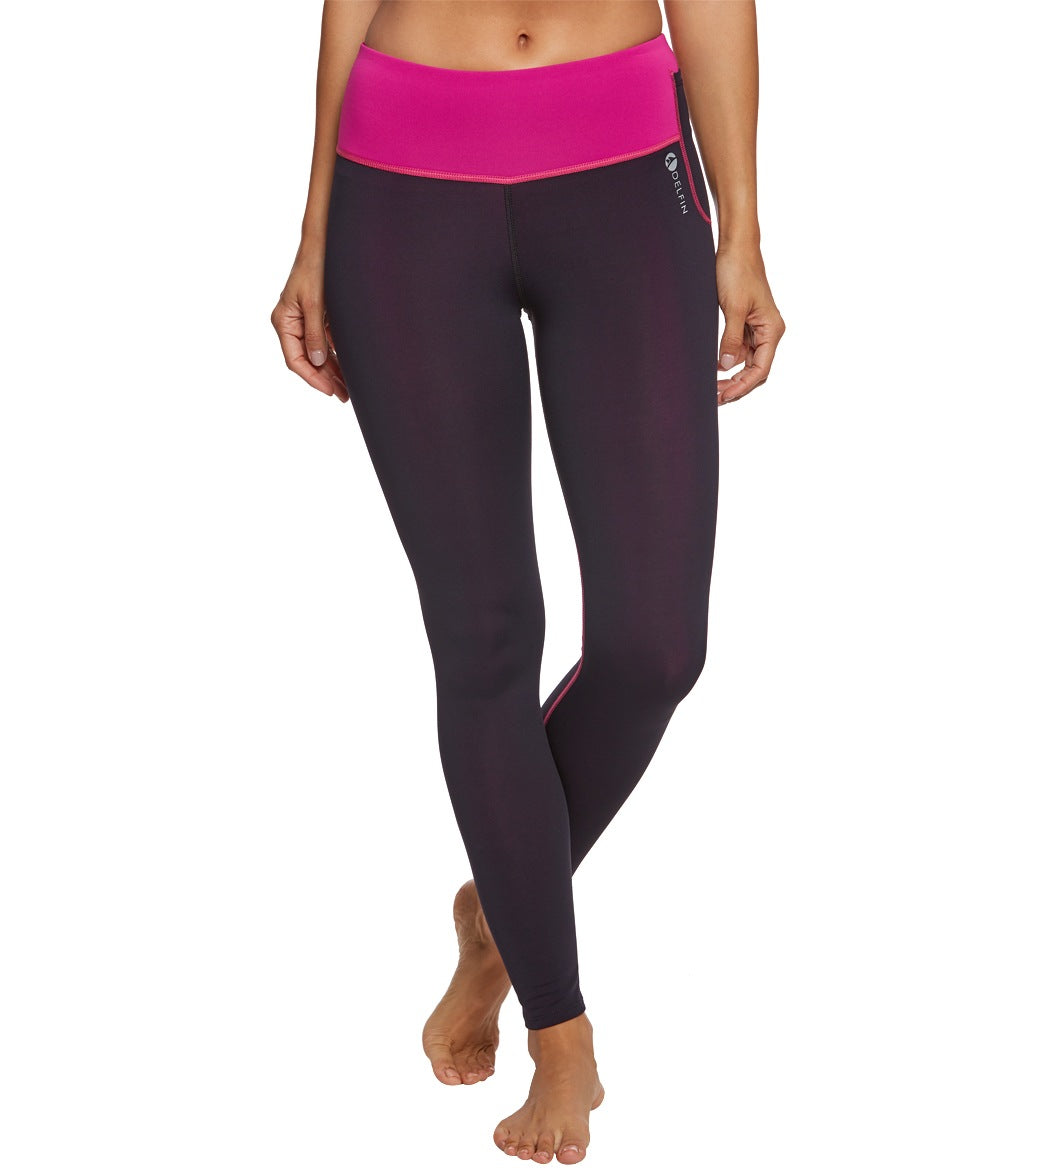 Delfin Spa Women's Mineral Infused Leggings - Black/Pink Large - Swimoutlet.com